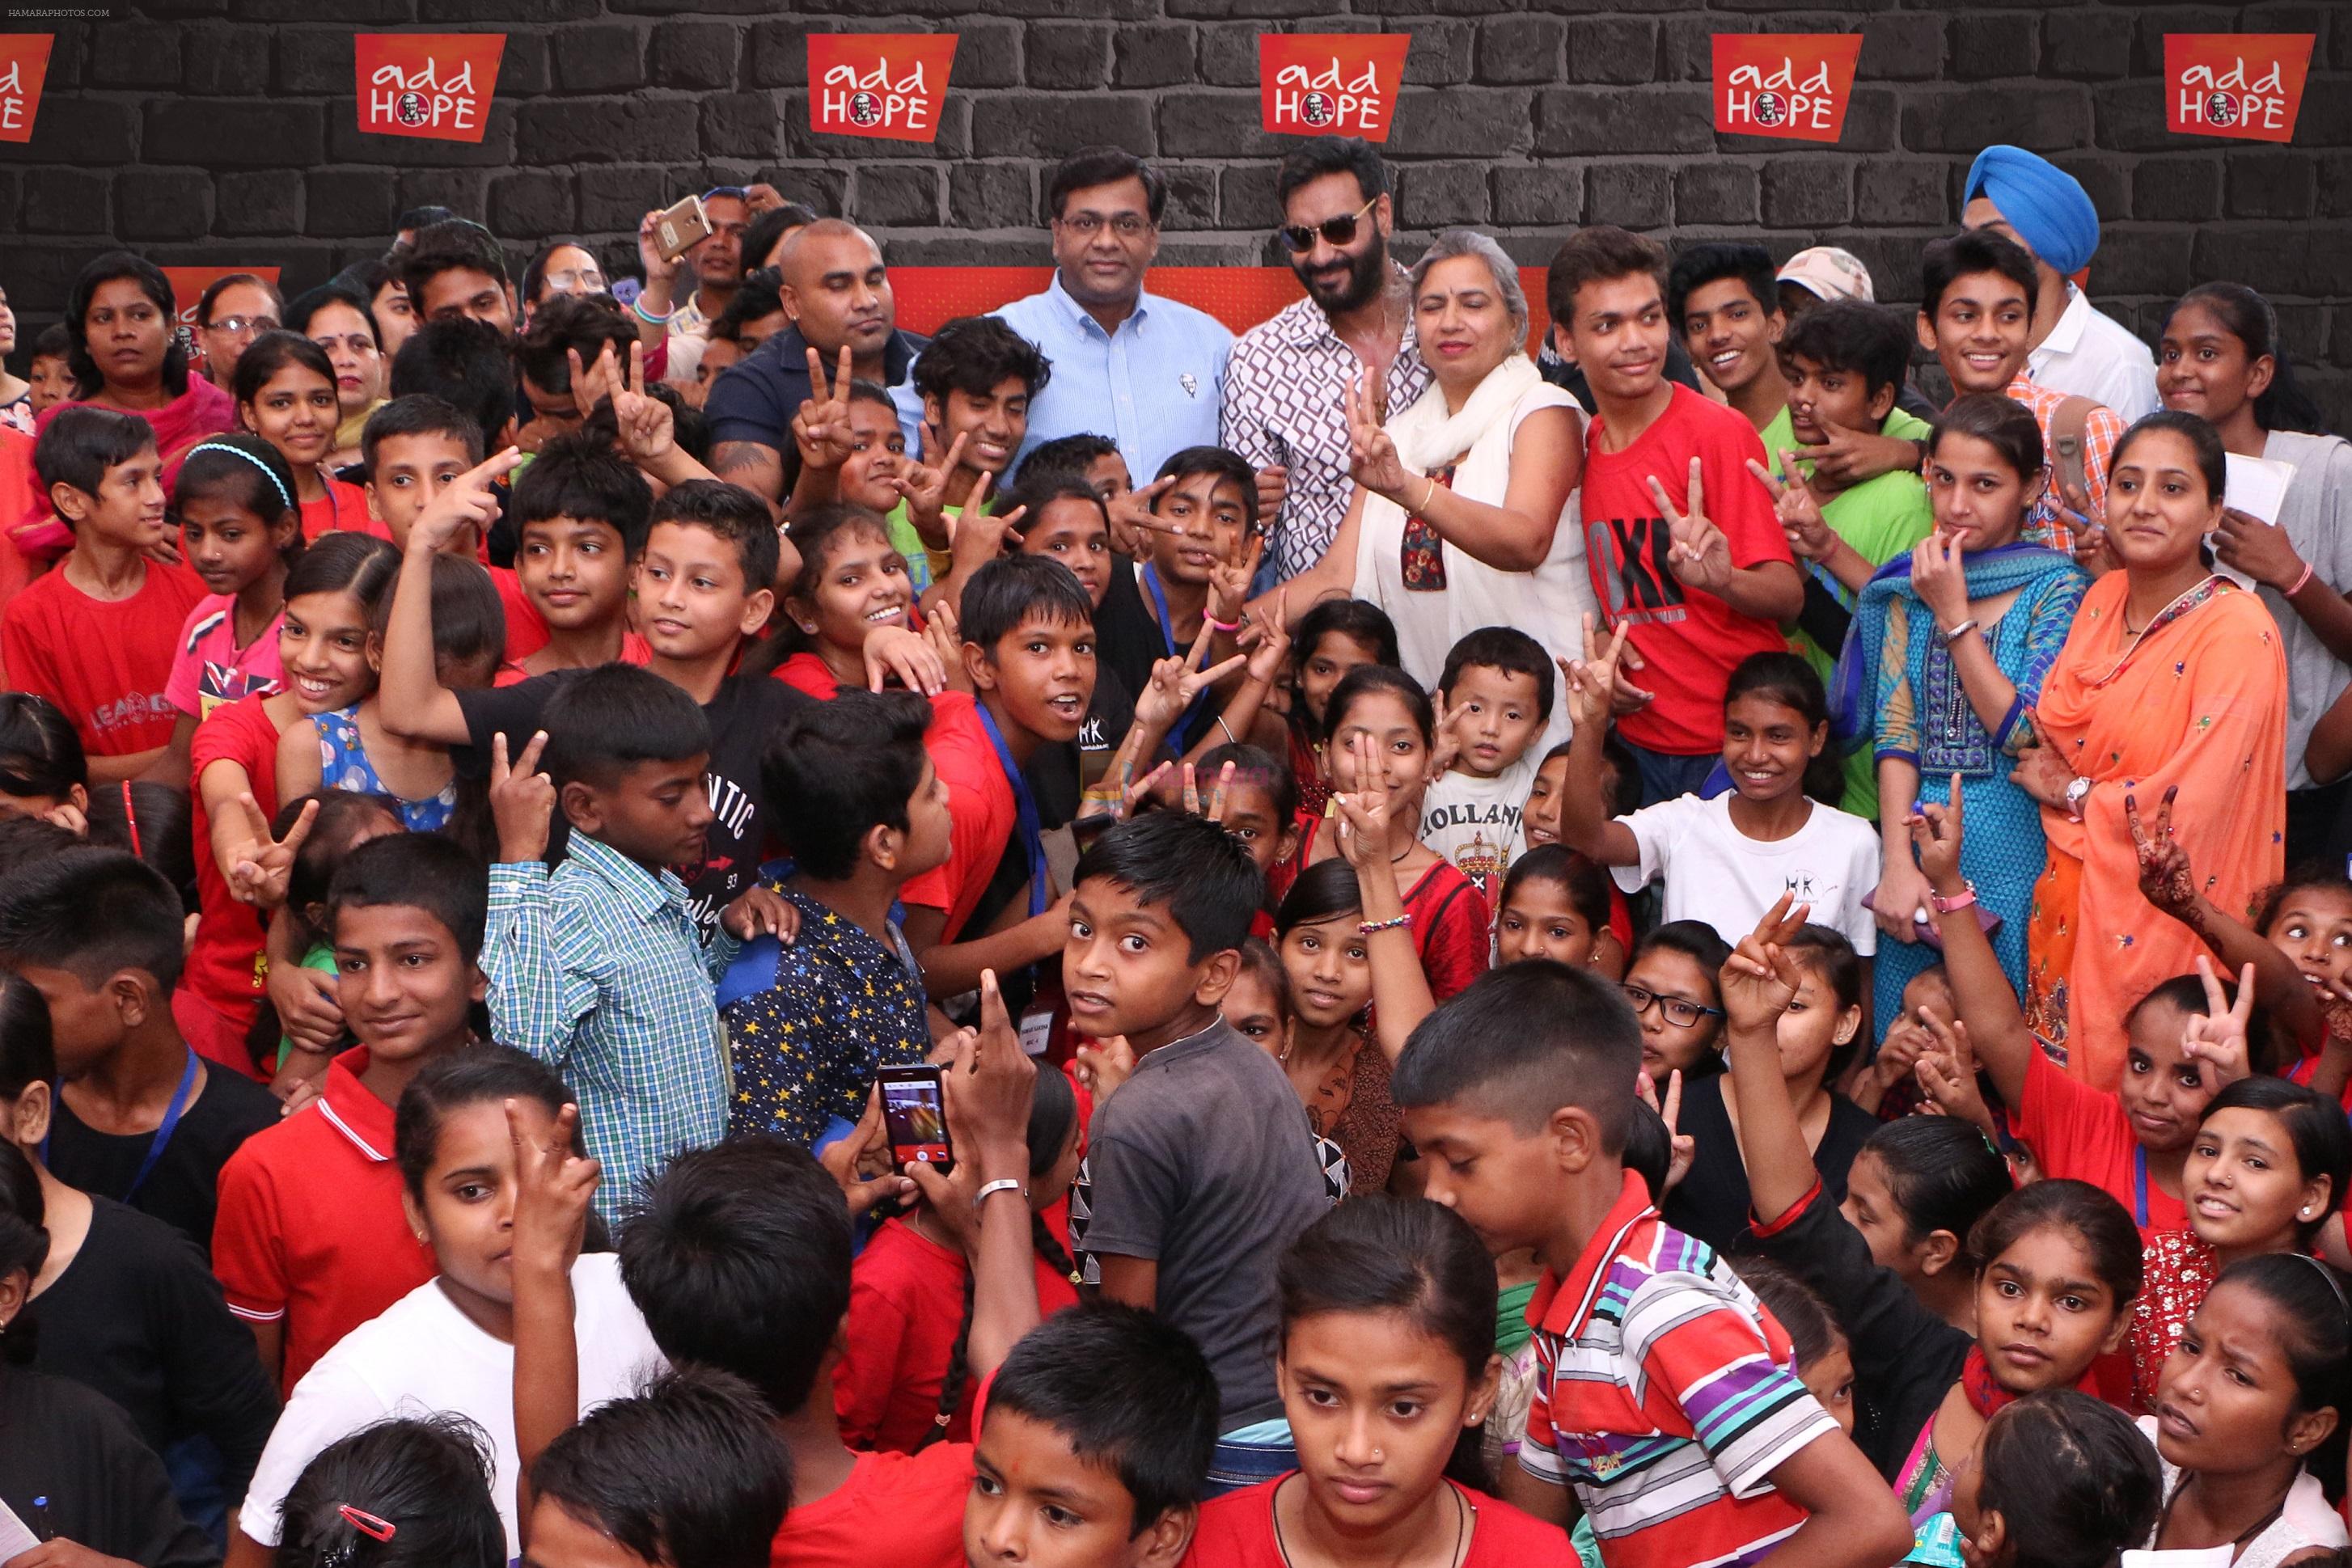 Praveen Reddy, Director, Restaurant Excellence and Area Countries, KFC India and Hope ambassador Ajay Devgn with kids at Hamaari Kaksha during add HOPE event in Chandigarh - Copy